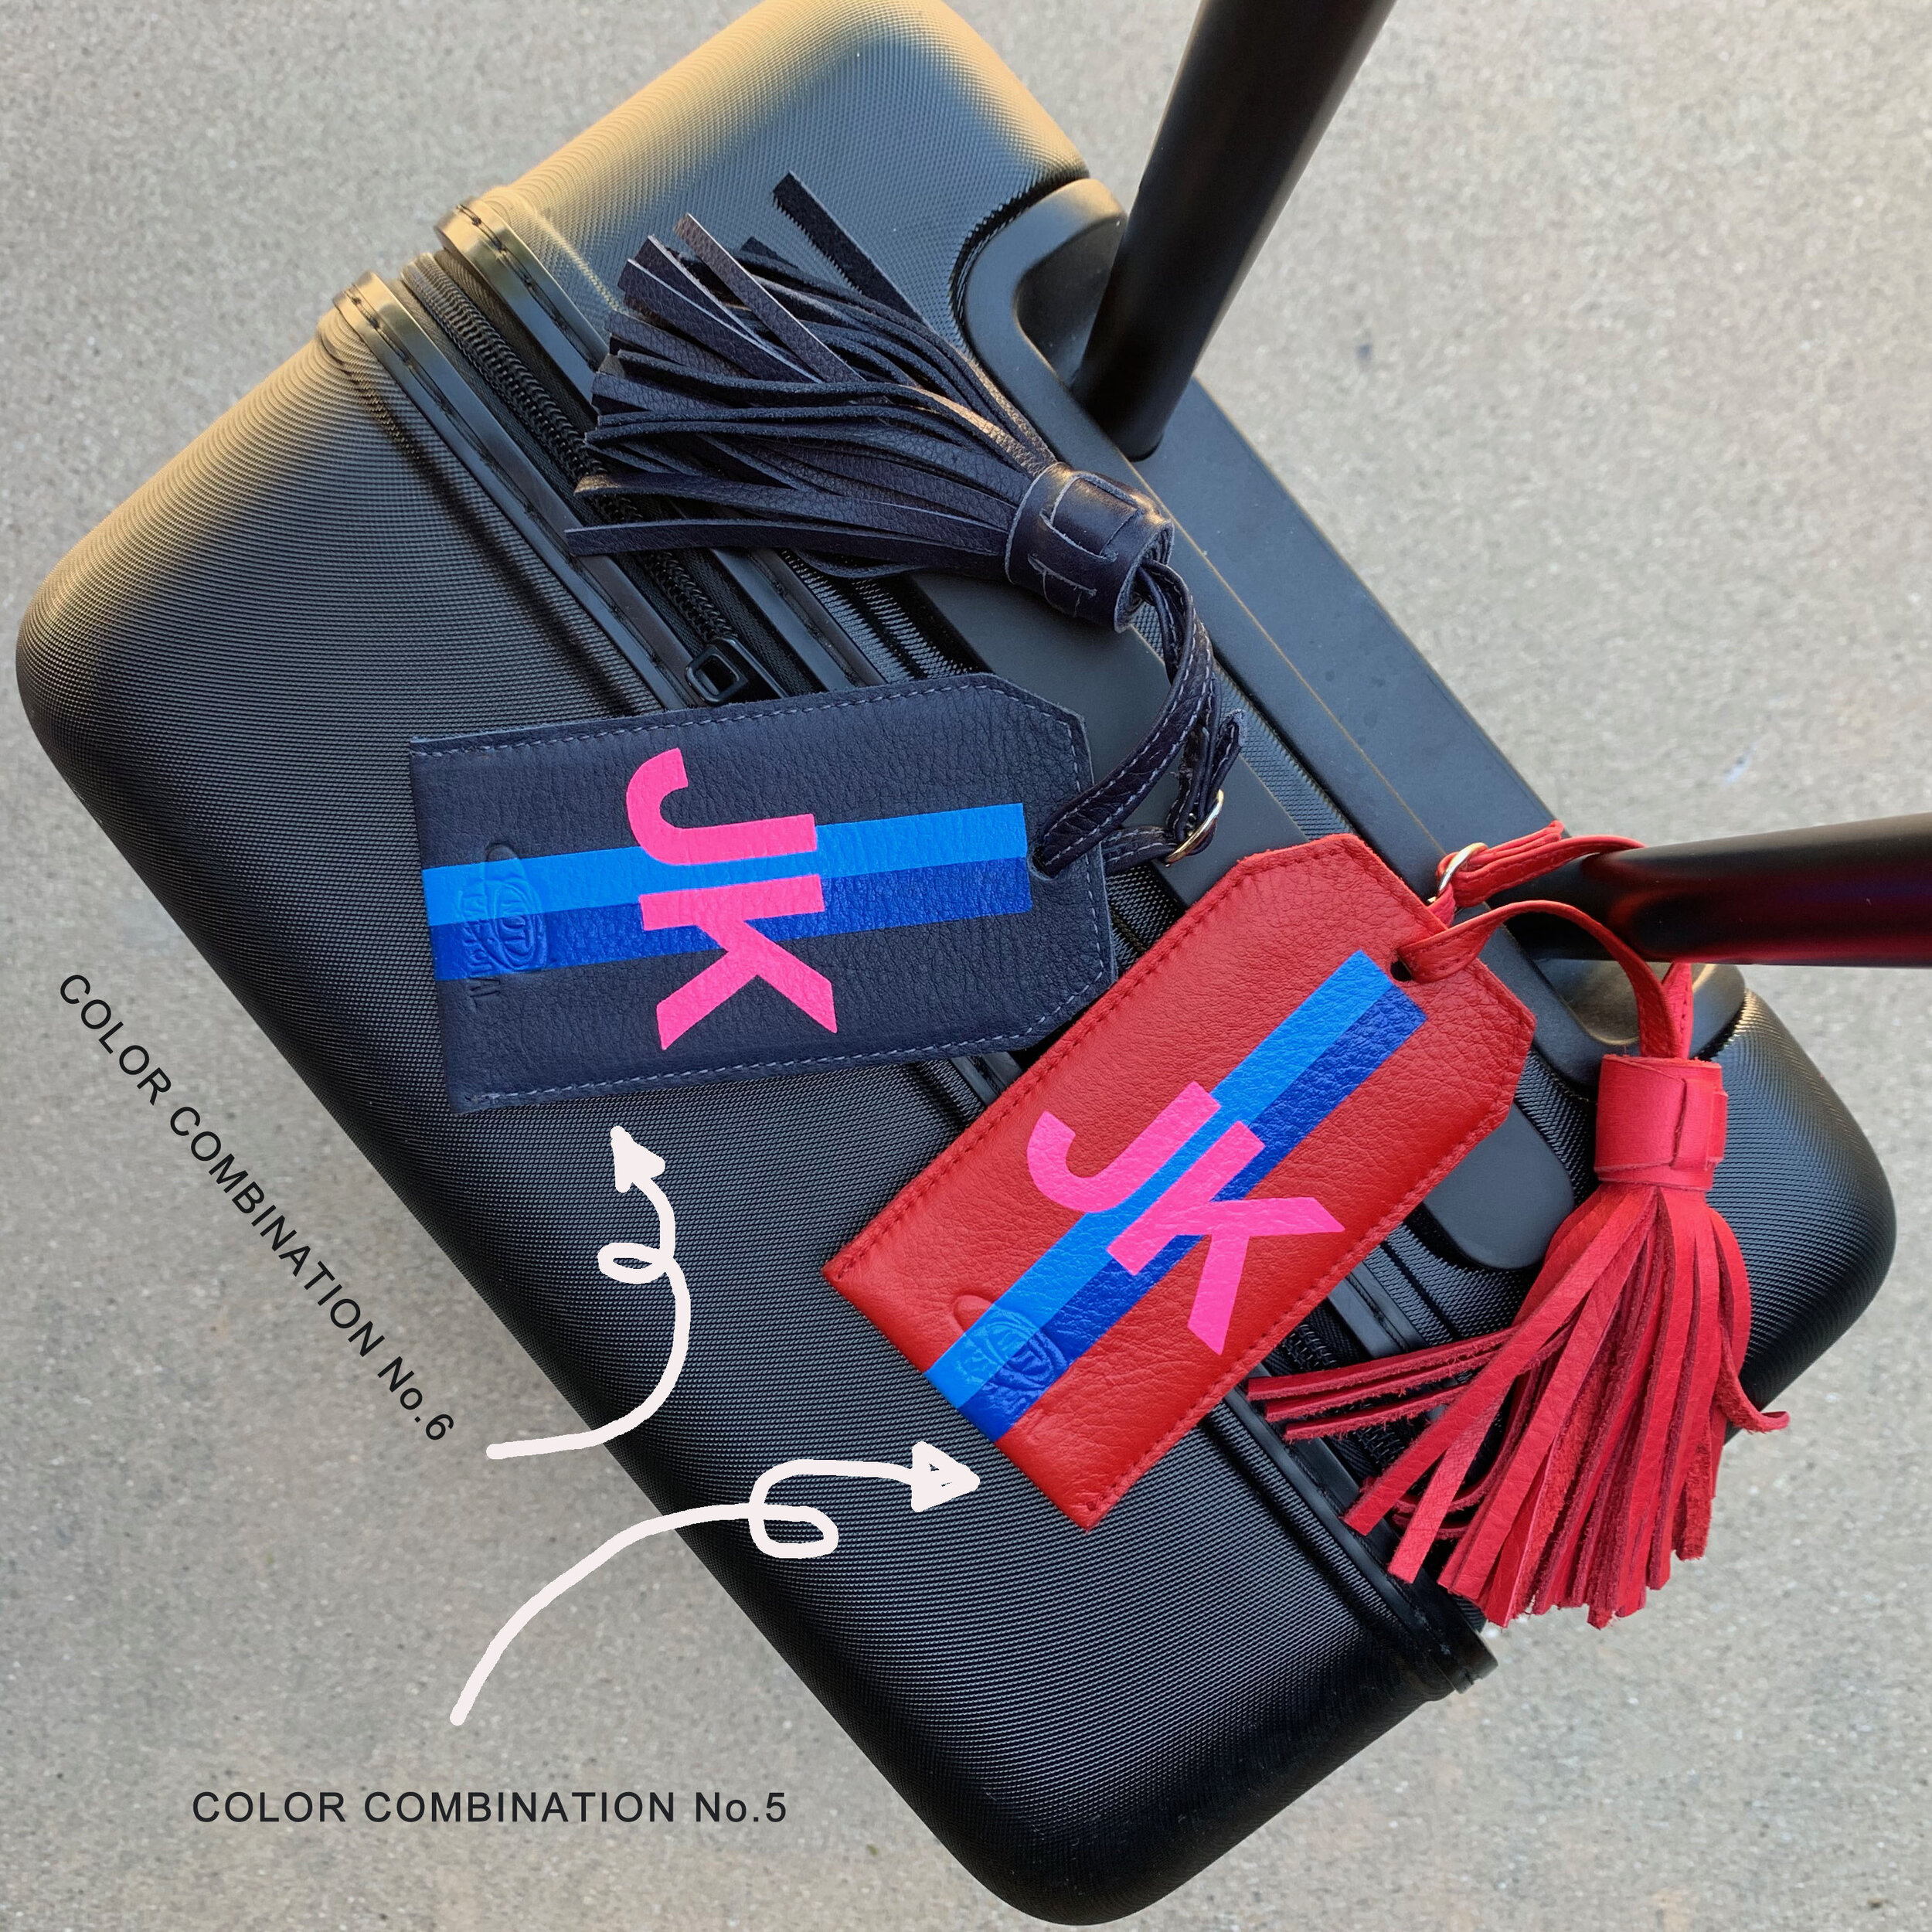 PERSONALIZED LUGGAGE TAGS — NOT RATIONAL